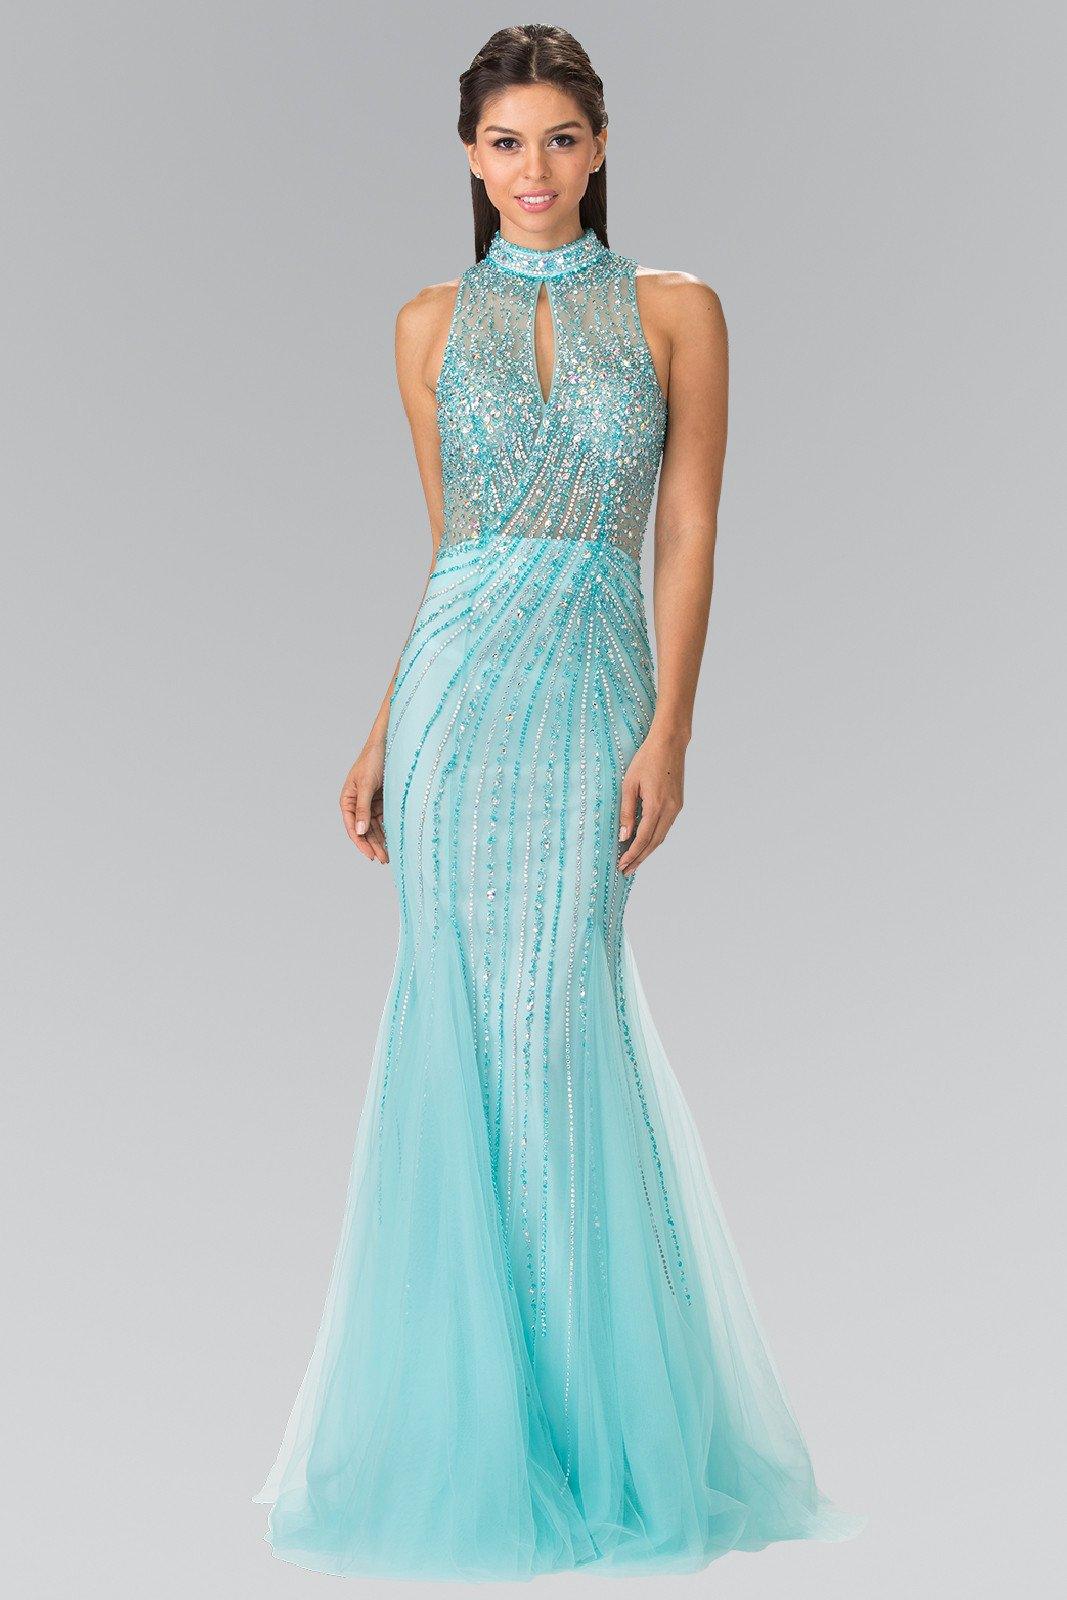 Long Halter Dress with Beaded Illusion Top by Elizabeth K GL2330-Long Formal Dresses-ABC Fashion